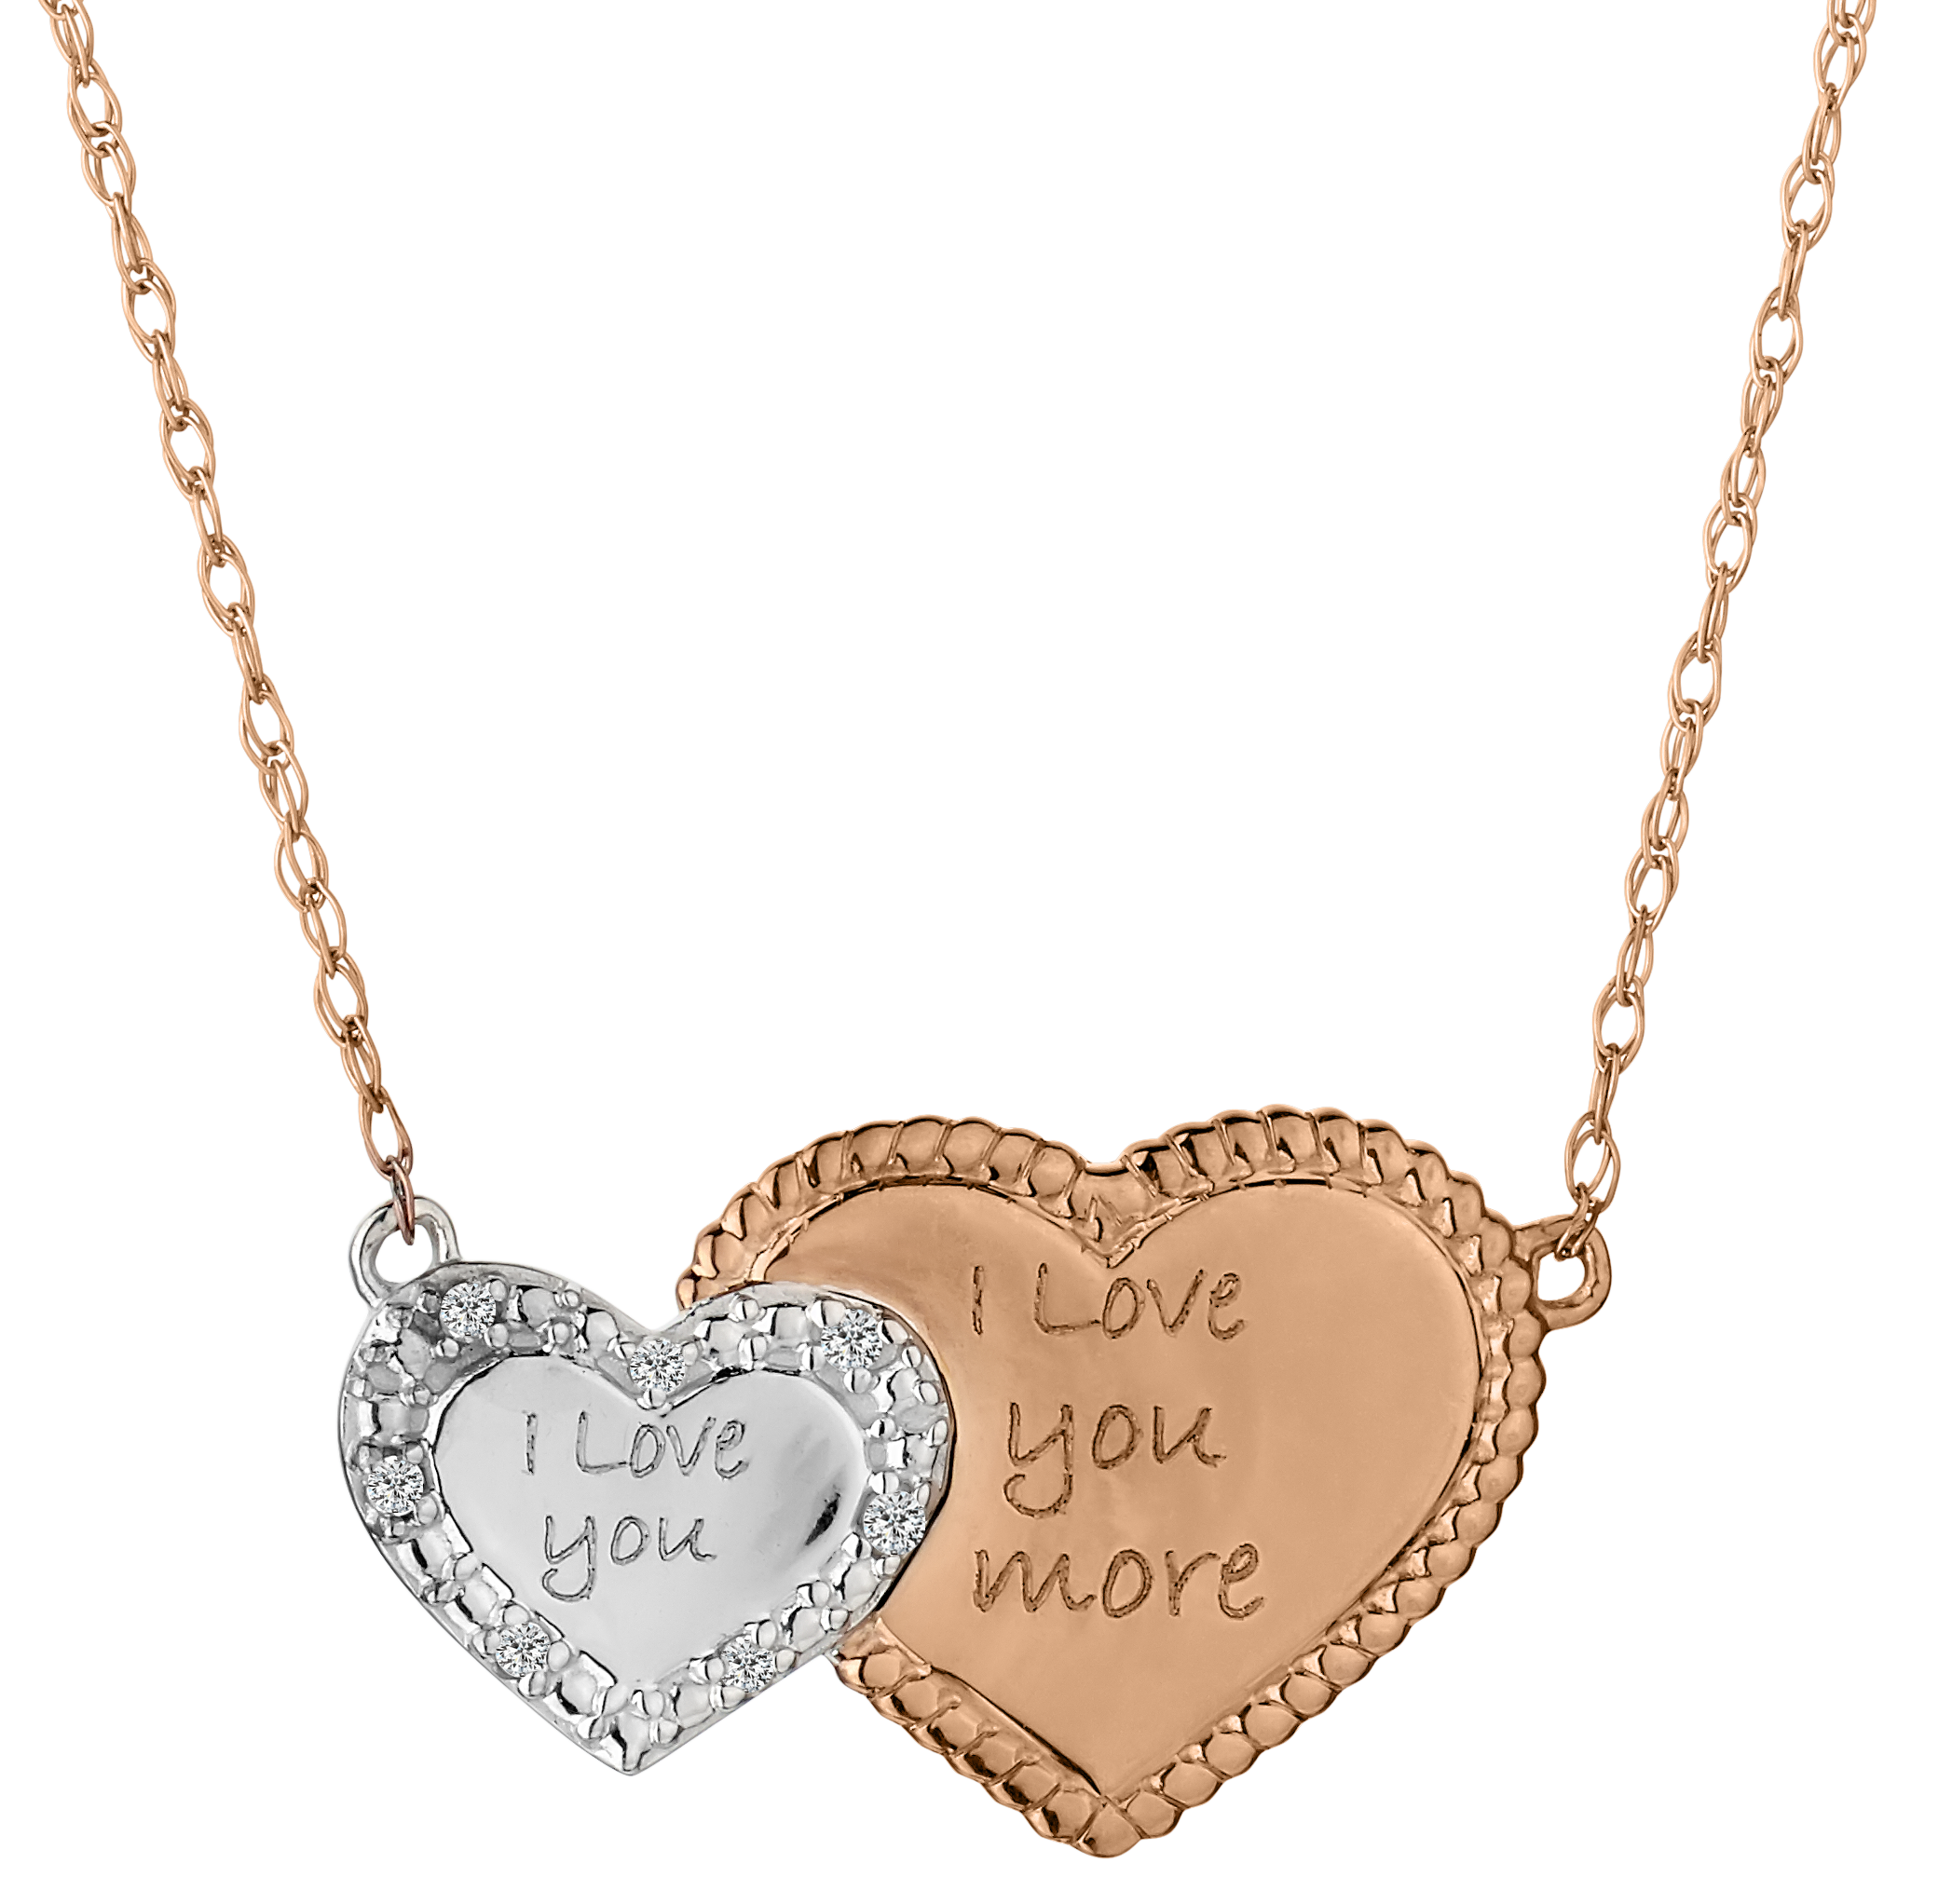 .03 Carat Diamond "I Love You, I Love You More" Double Heart Pendant,  10kt Rose Gold and Sterling Silver. Necklaces and Pendants. Griffin Jewellery Designs